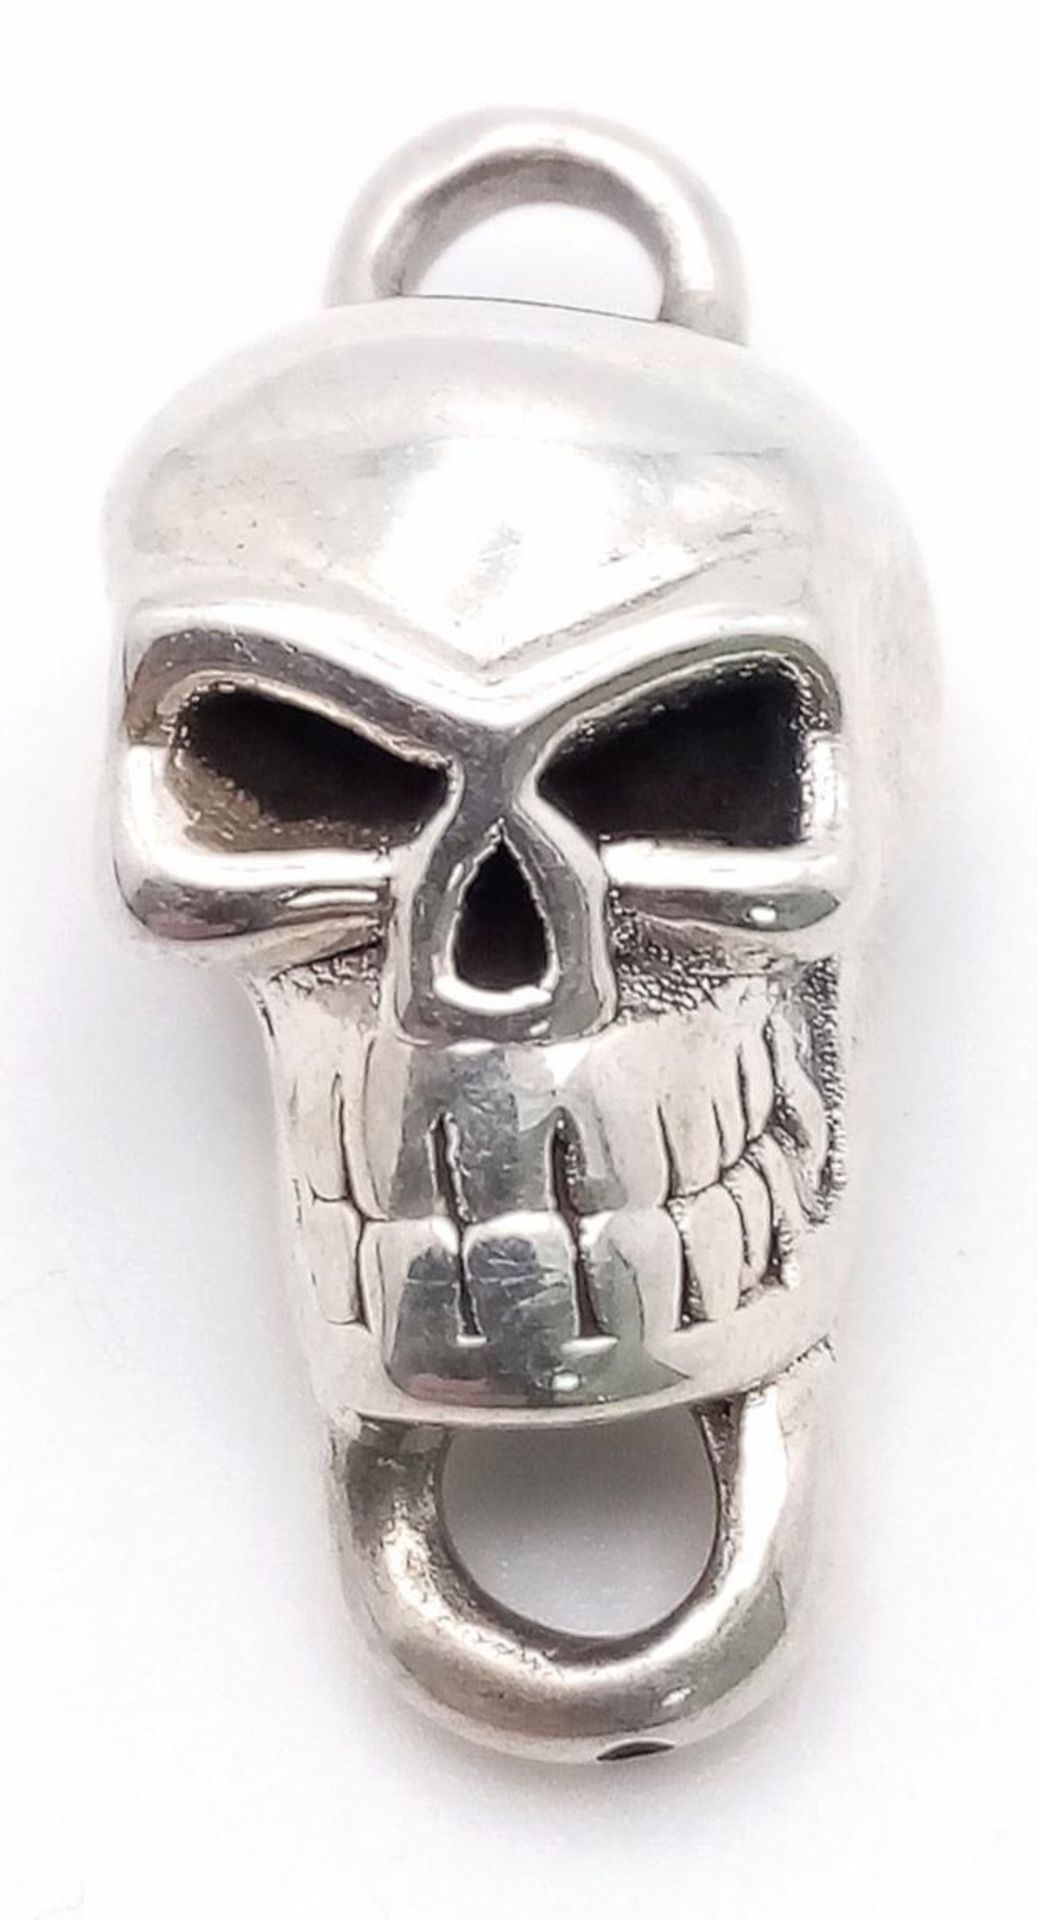 STERLING SILVER (TESTED) SKULL PENDANT/CHARM, WEIGHT 2G, 25MM LONG APPROX, REF SC 4126